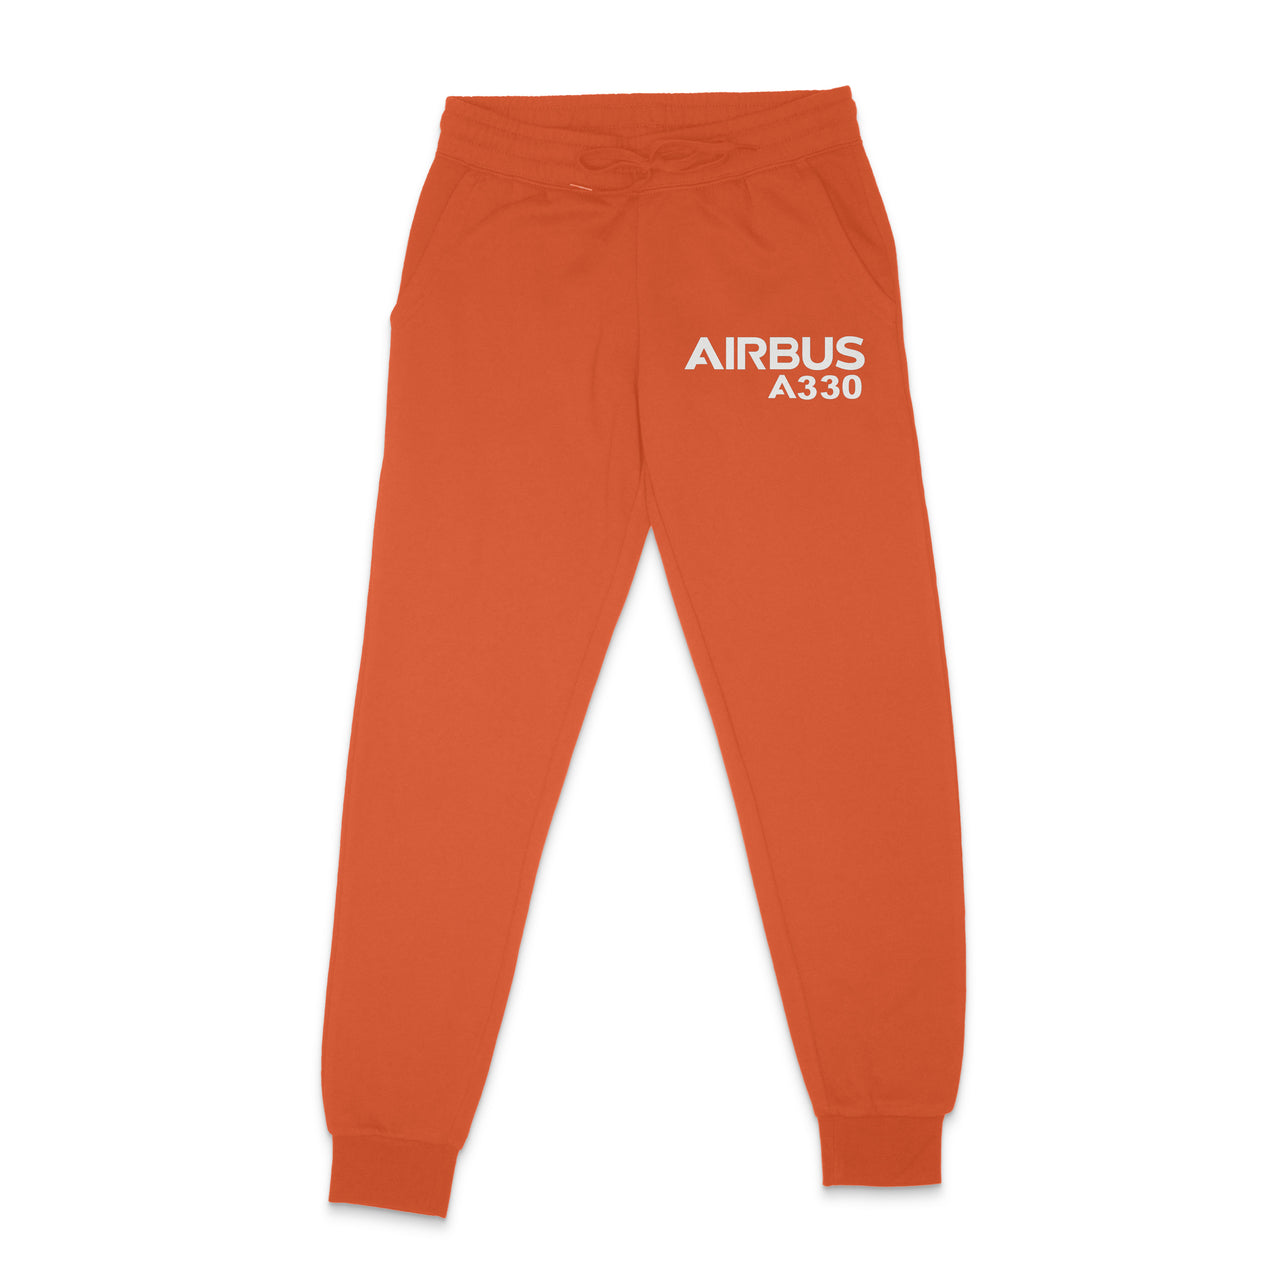 Airbus A330 & Text Designed Sweatpants